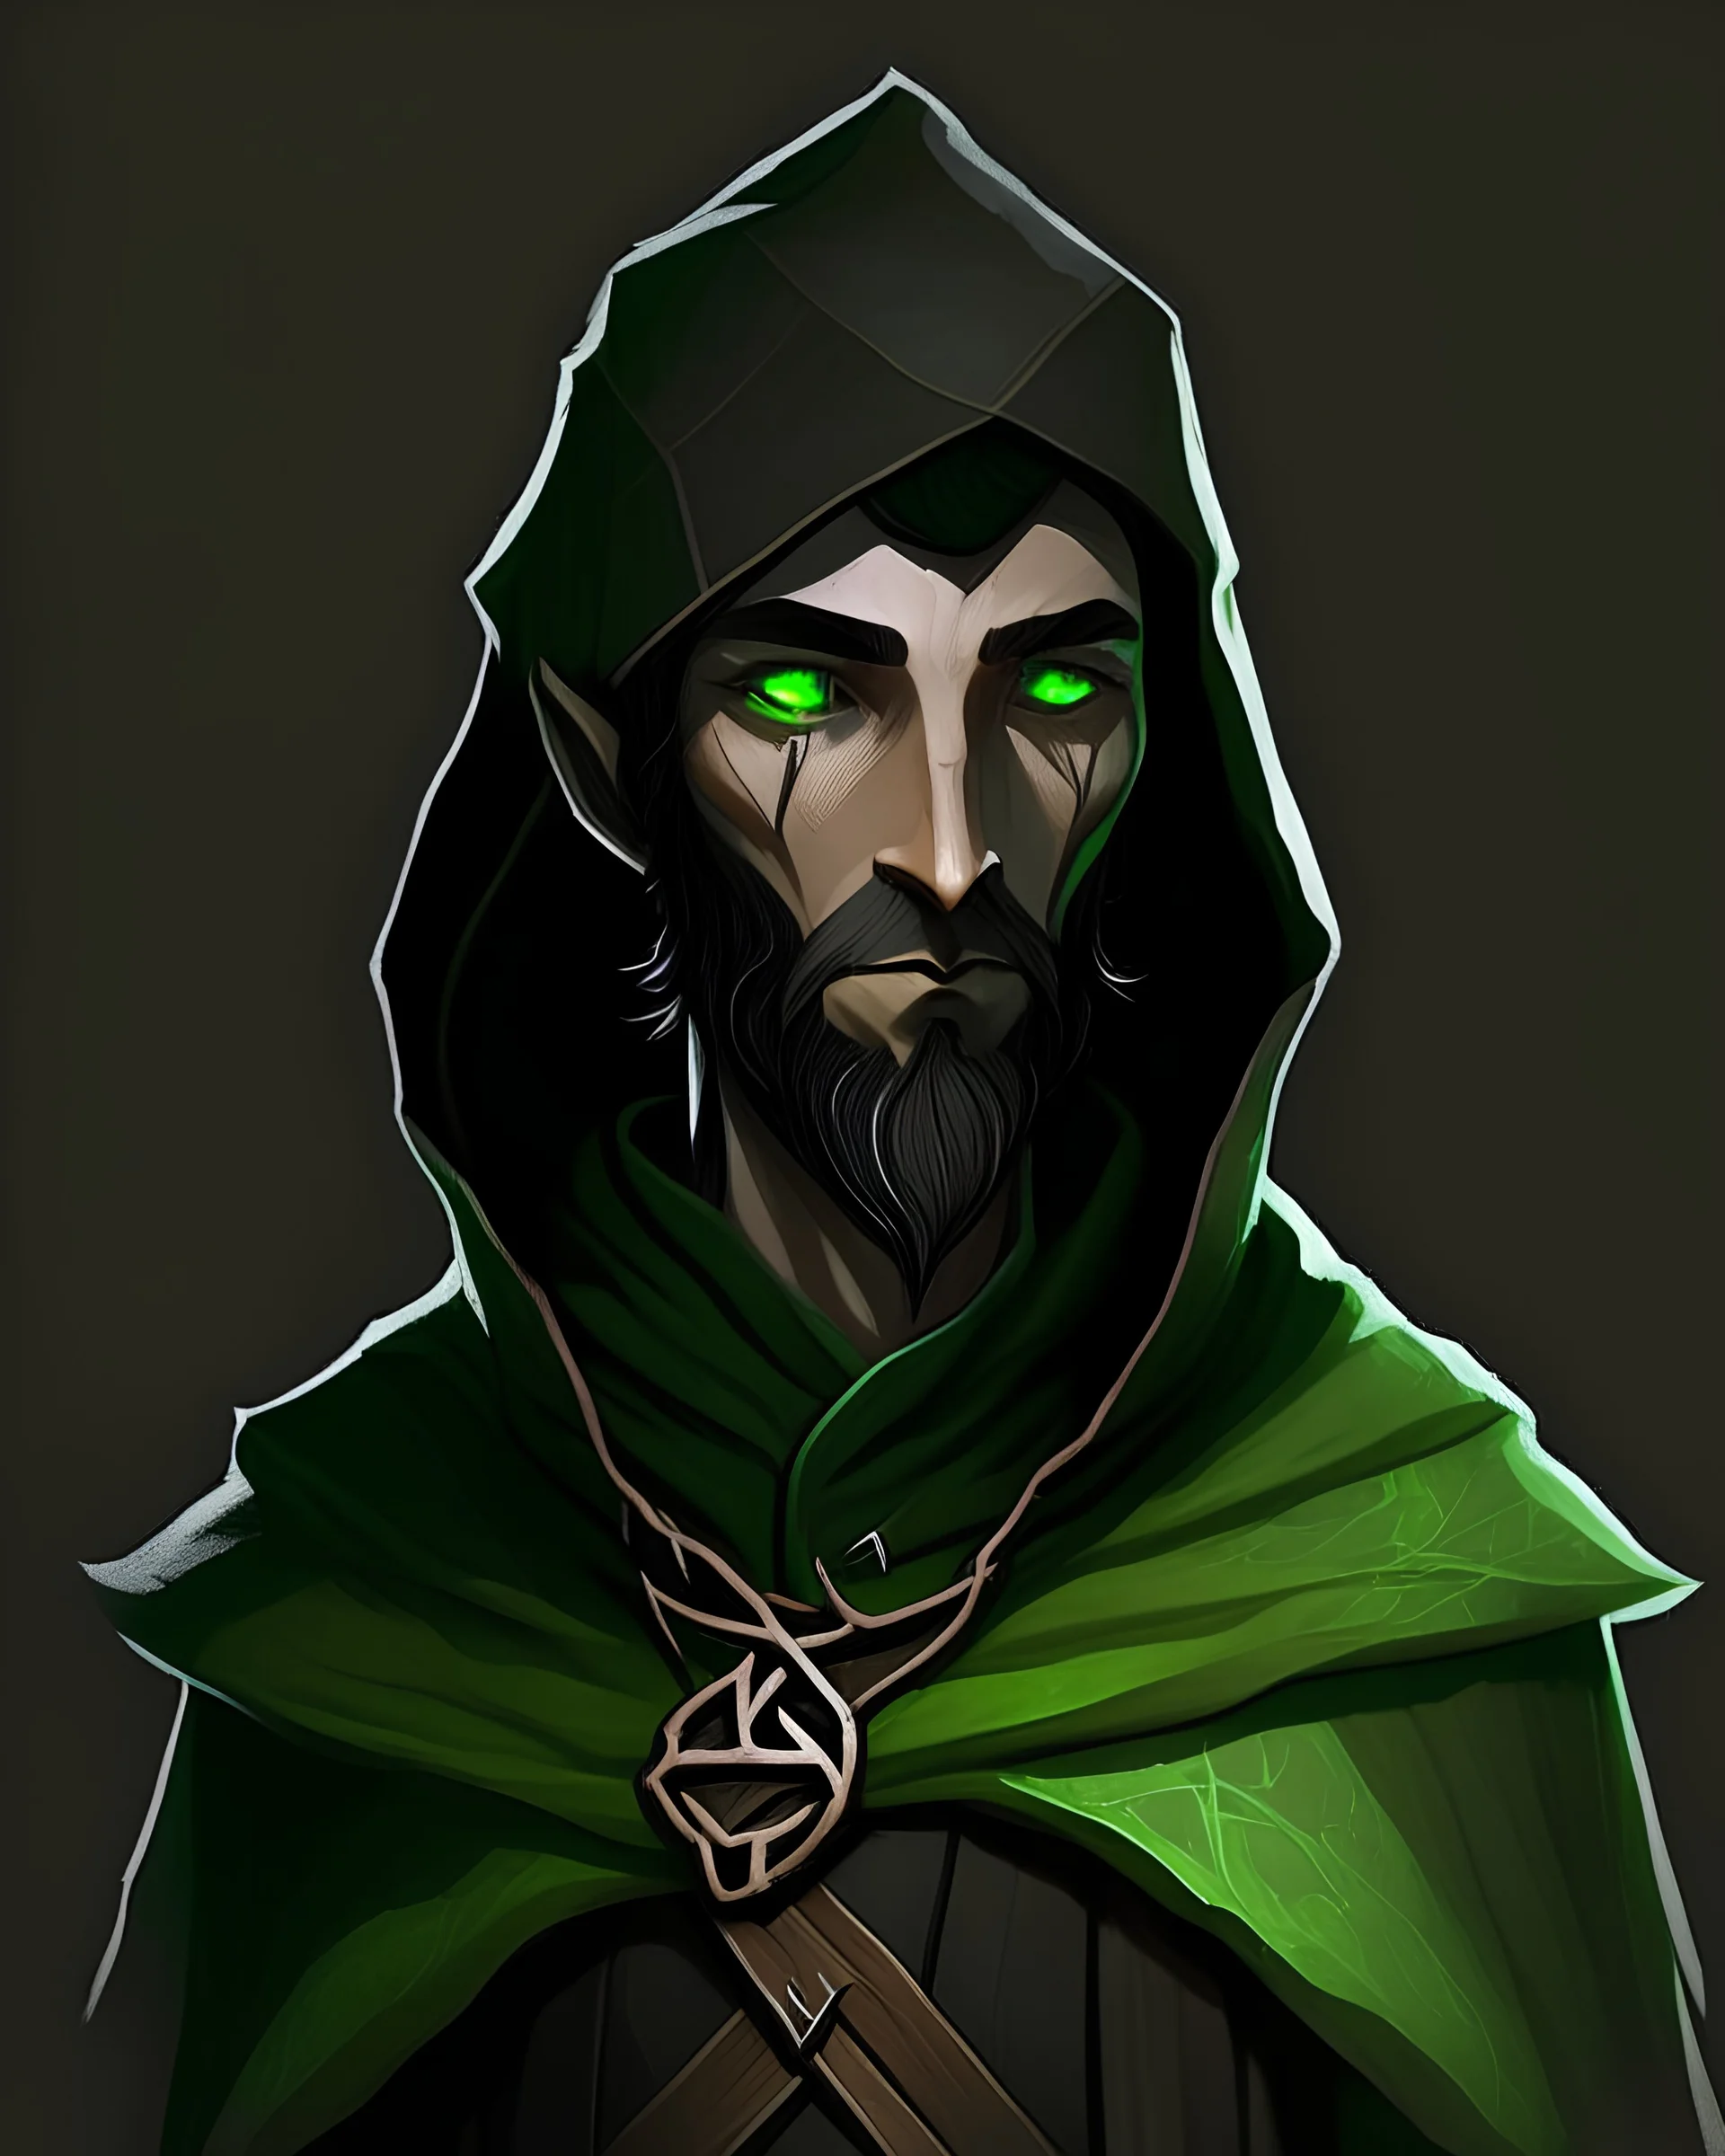 Bronin is a younger wood elf. He is very stoic. He has slightly tanned skin. He has a black beard. His left eye is gone and is replaced with a green sphere that glows a bright green. He wears very basic black robes. His black hood goes over his head. He has a black cape. His left arm has a green spiraling tattoo and a black arm wrap around his hand and forearm. his right arm is missing and has been replaced with a wooden prosthetic. The arm looks like the branch of a tree.